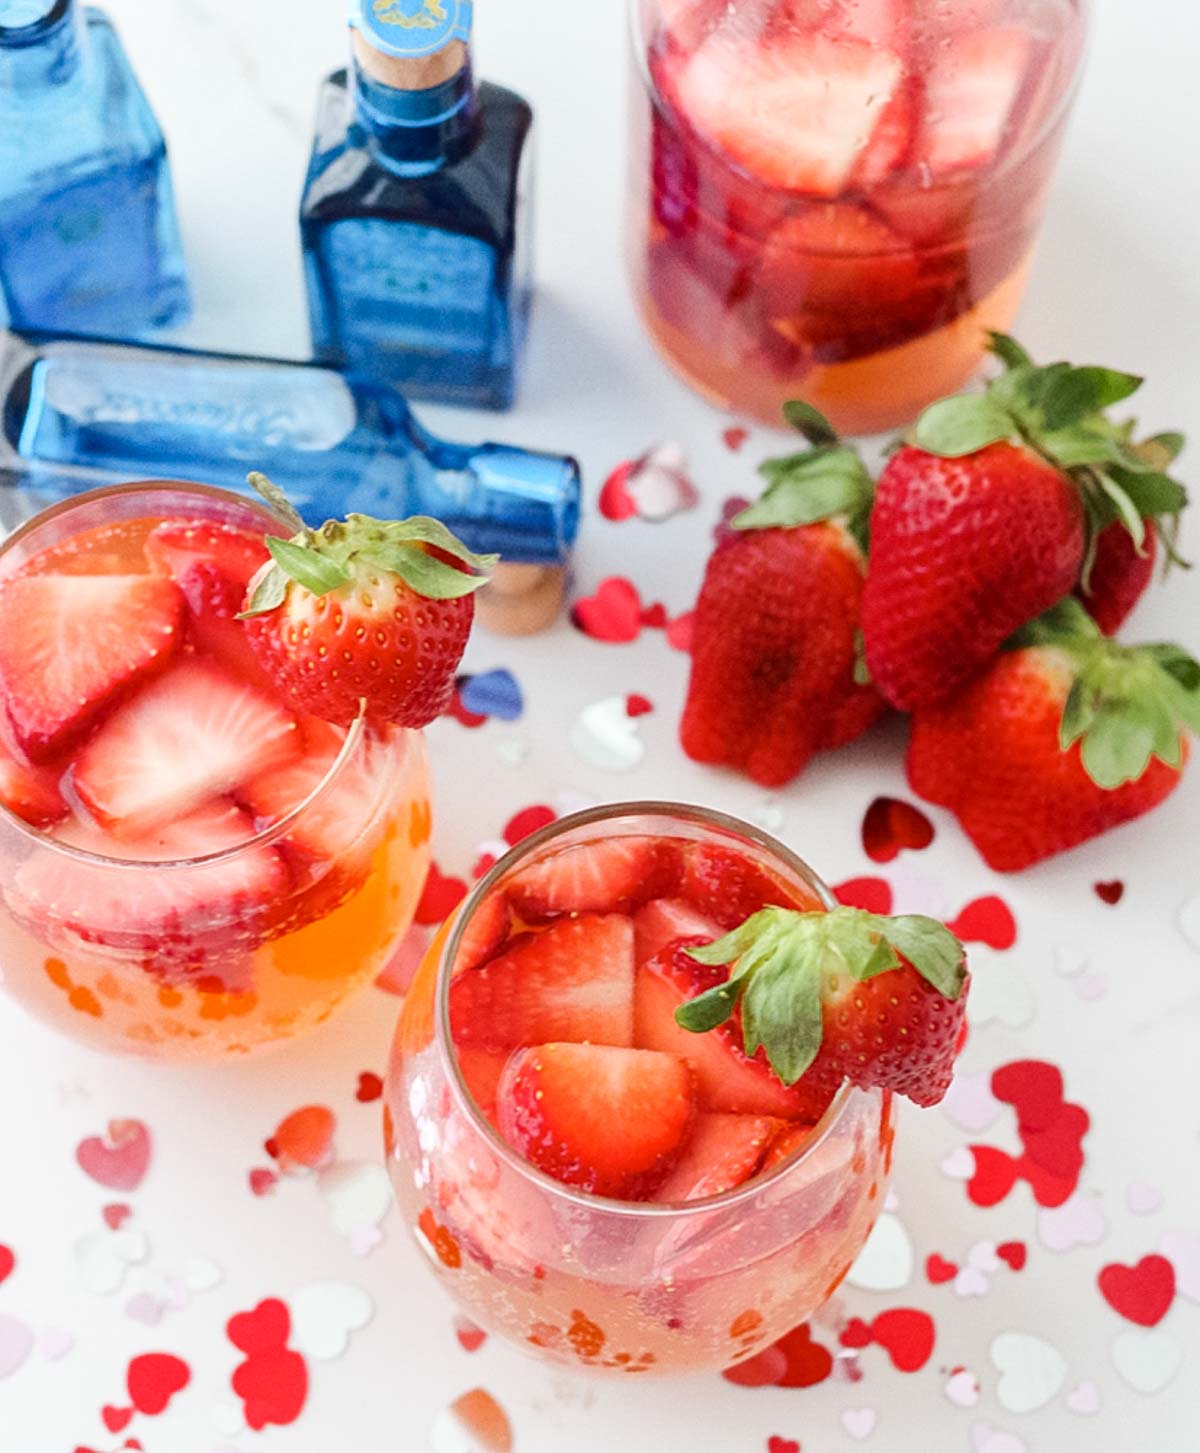 overhead view of stemless wine glasses with a pink strawberry cocktail surrounded by valentines confetti, fresh strawberries, and miniature gin bottles